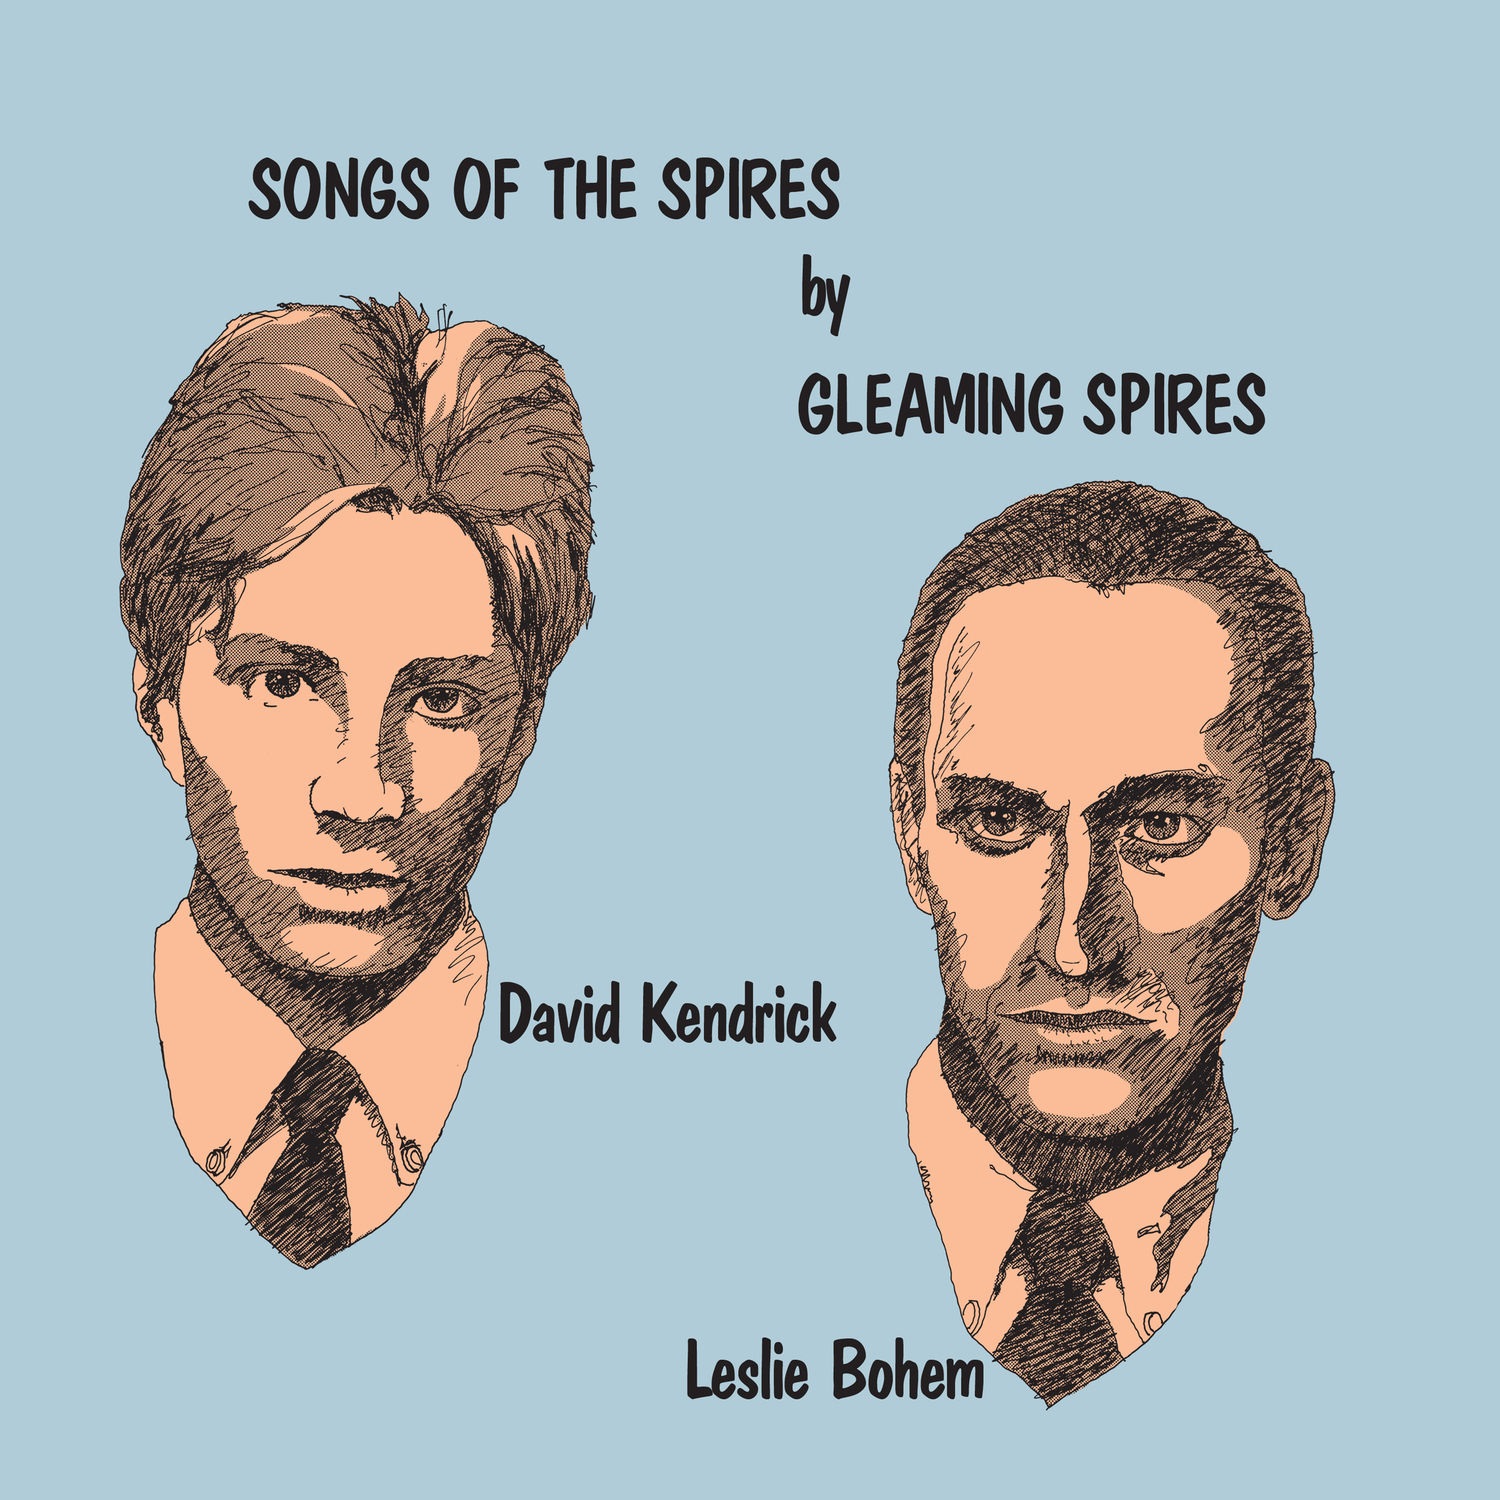 Gleaming Spires – Songs of the Spires (Expanded Edition) (1981/2021) [FLAC 24bit/96kHz]